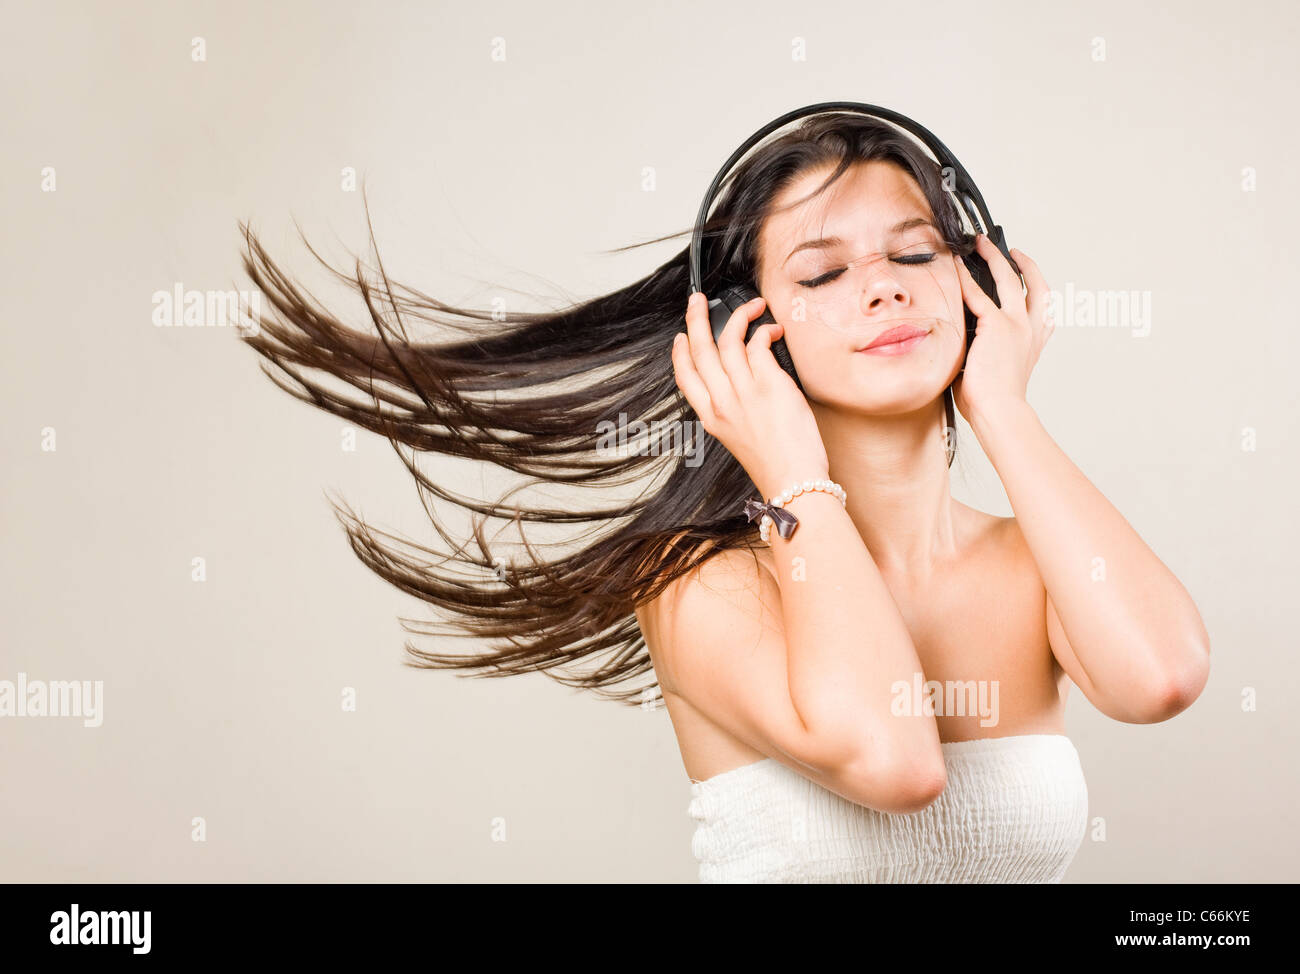 Gorgeous young brunette immersed in music wearing headphones. Stock Photo